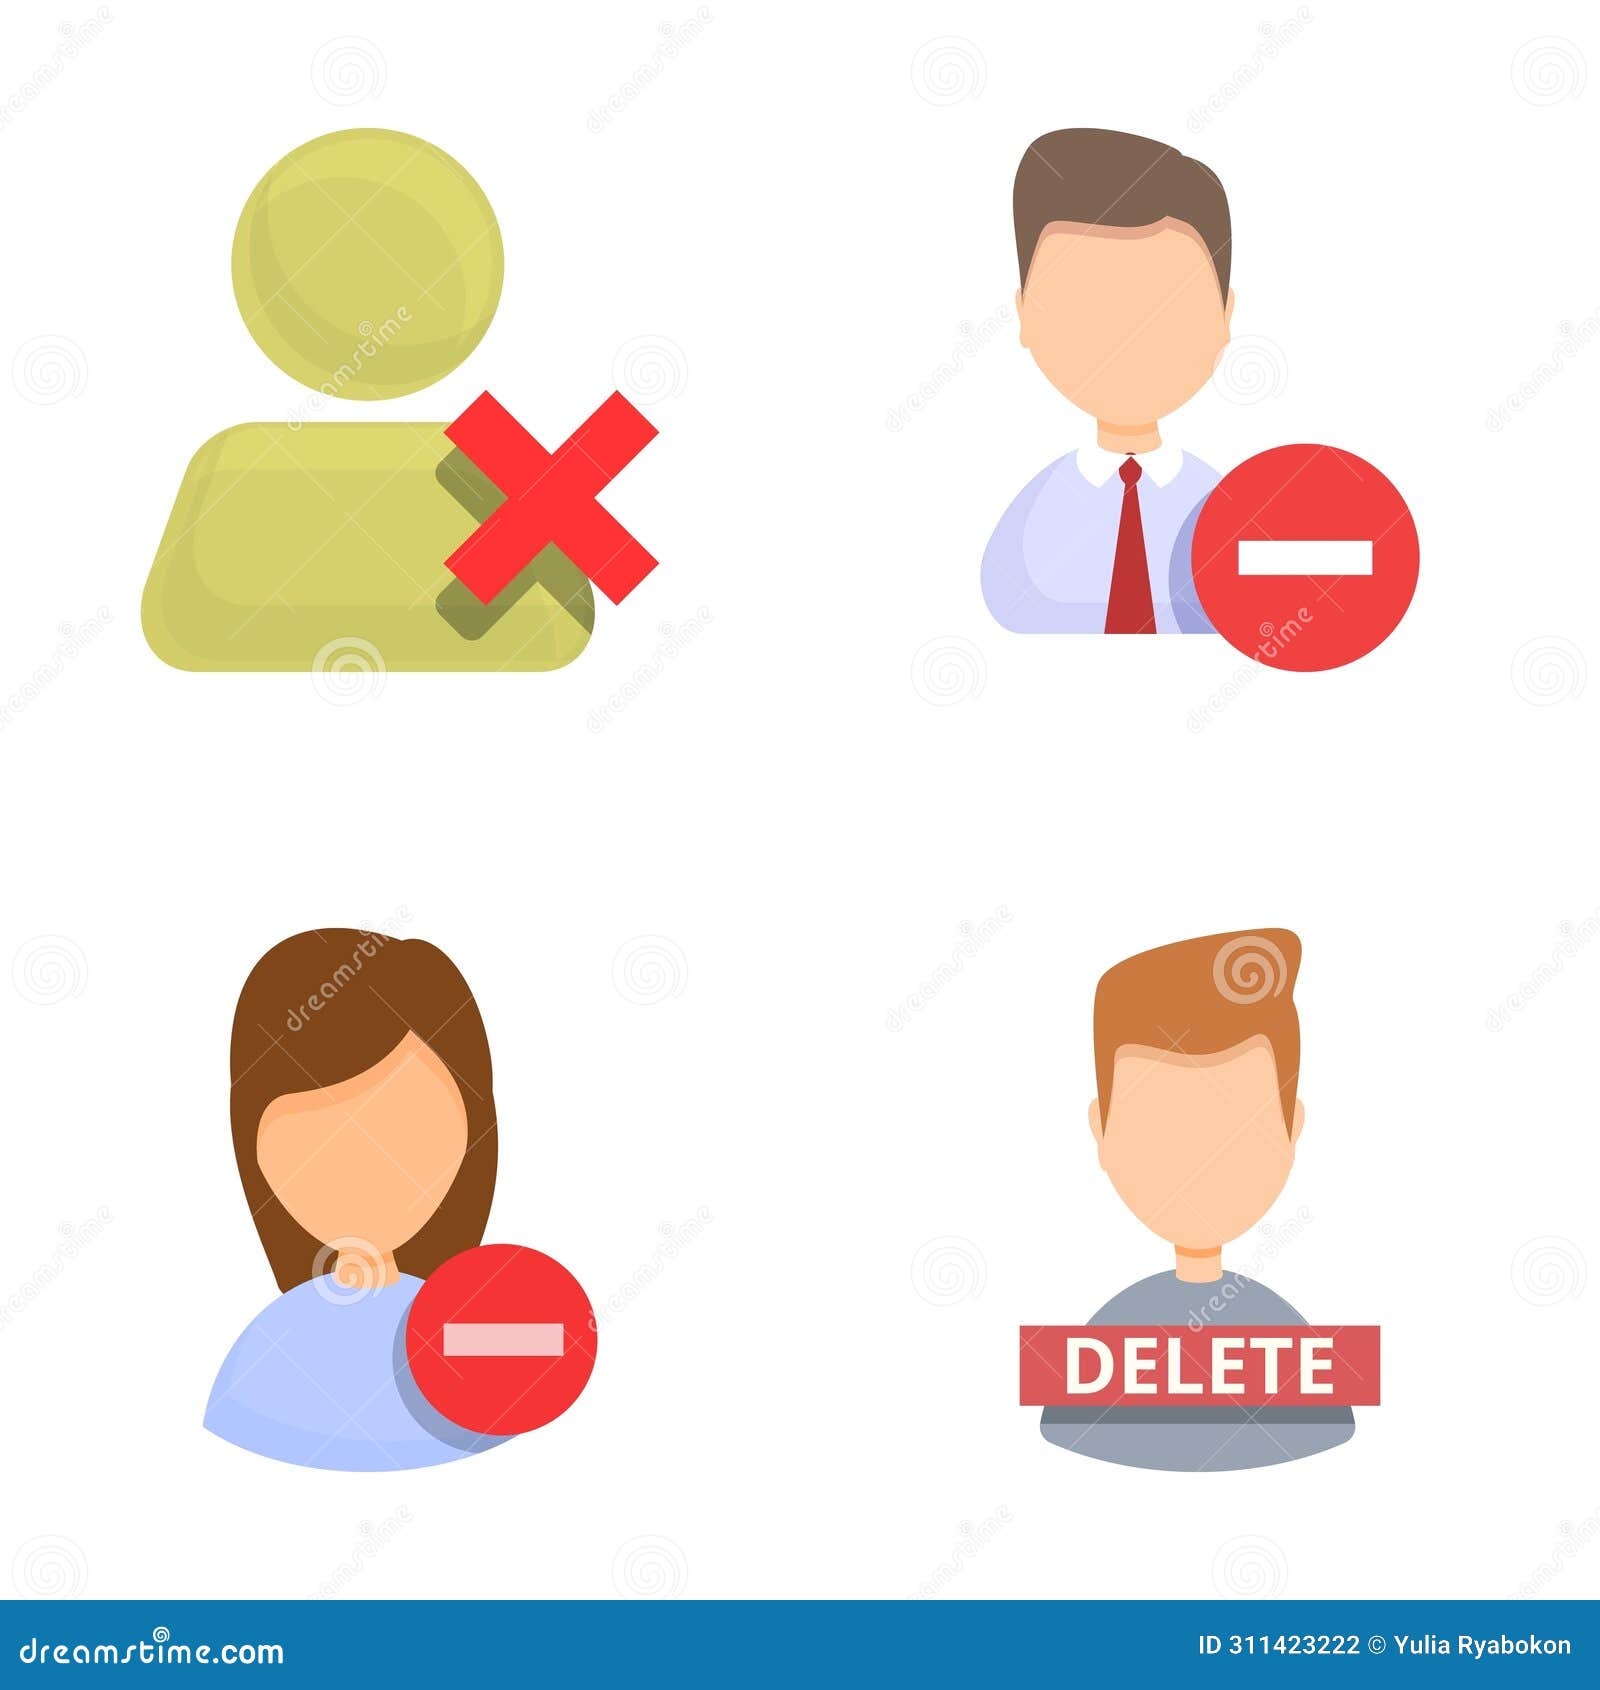 delete user icons set cartoon . account cannot be accessed or used